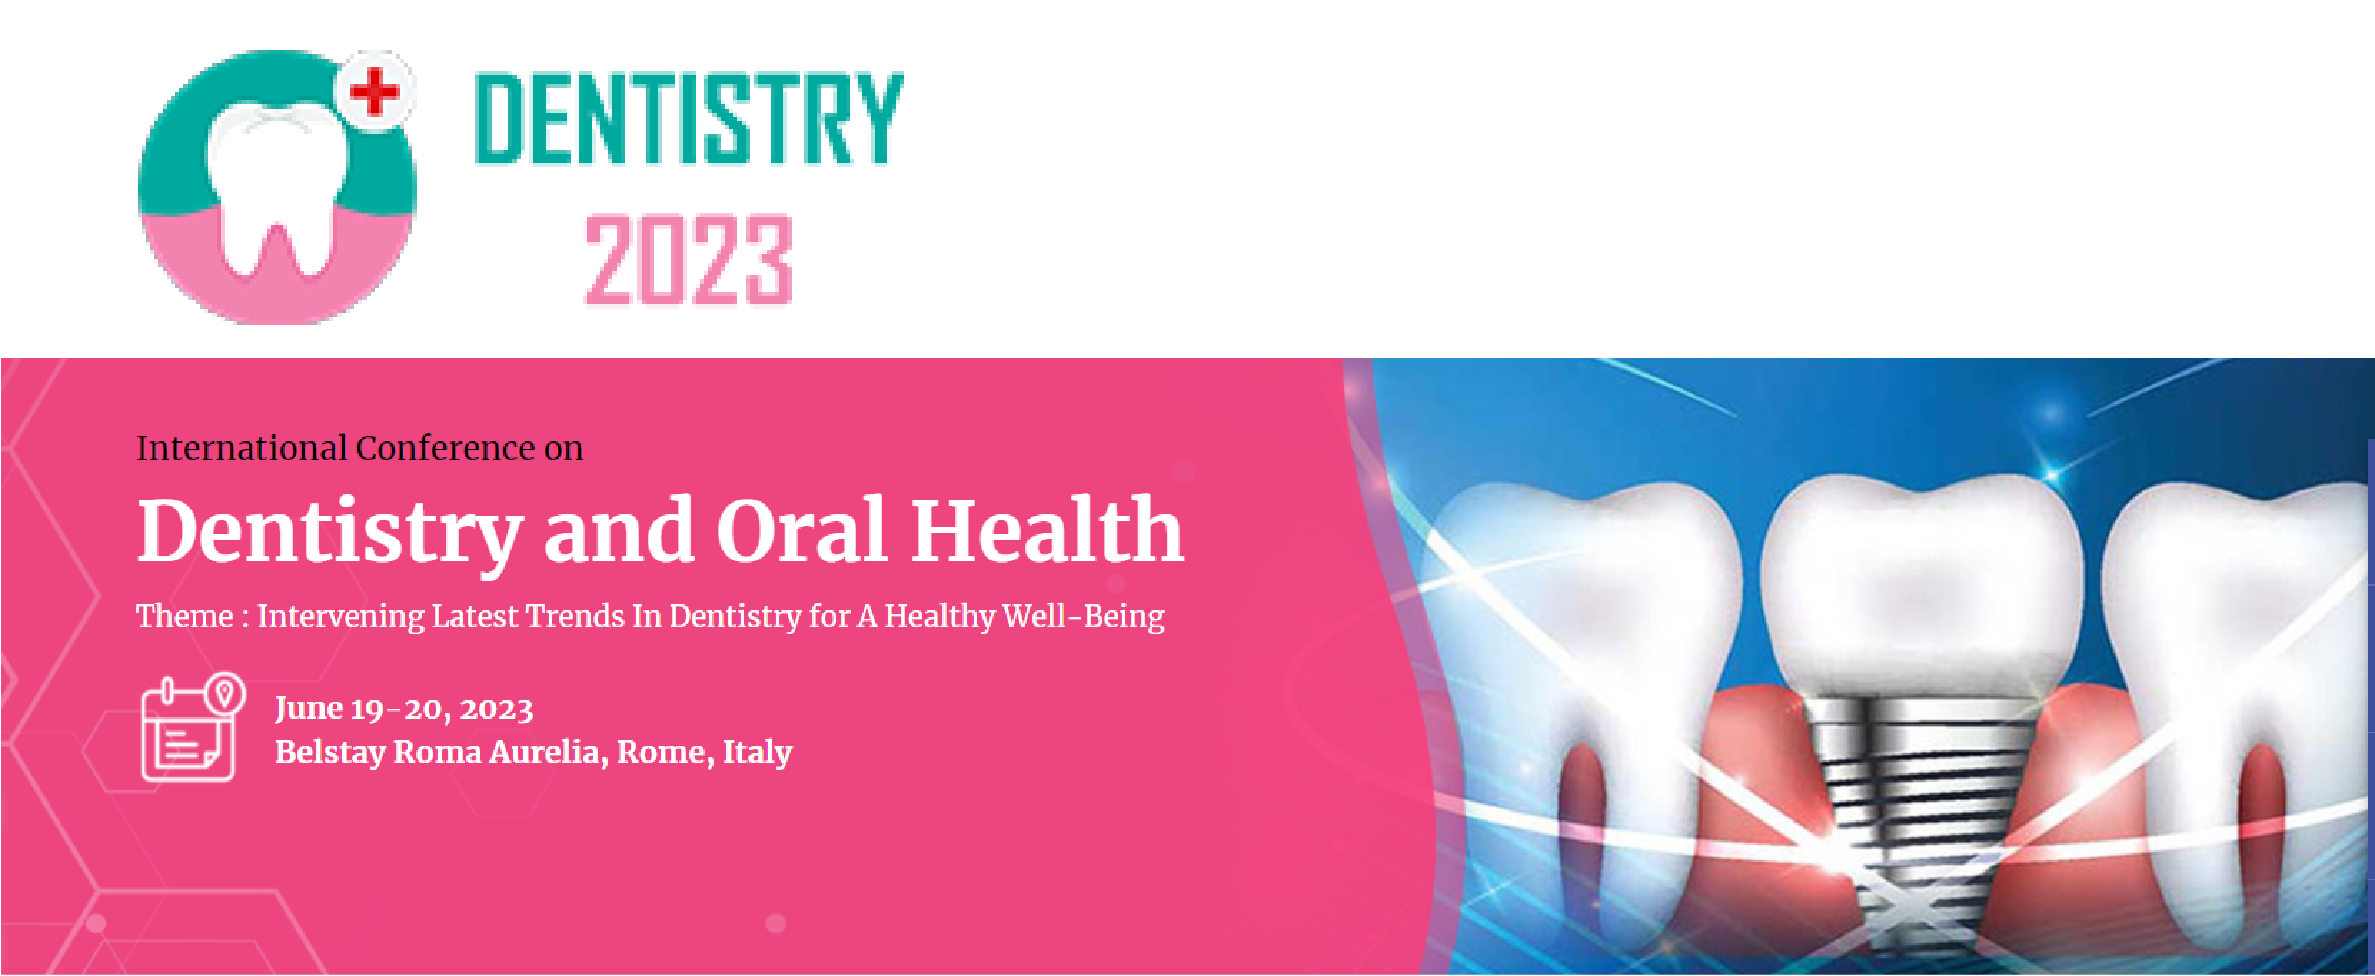 International Conference on Dentistry and Oral Health - ICDOH 2023